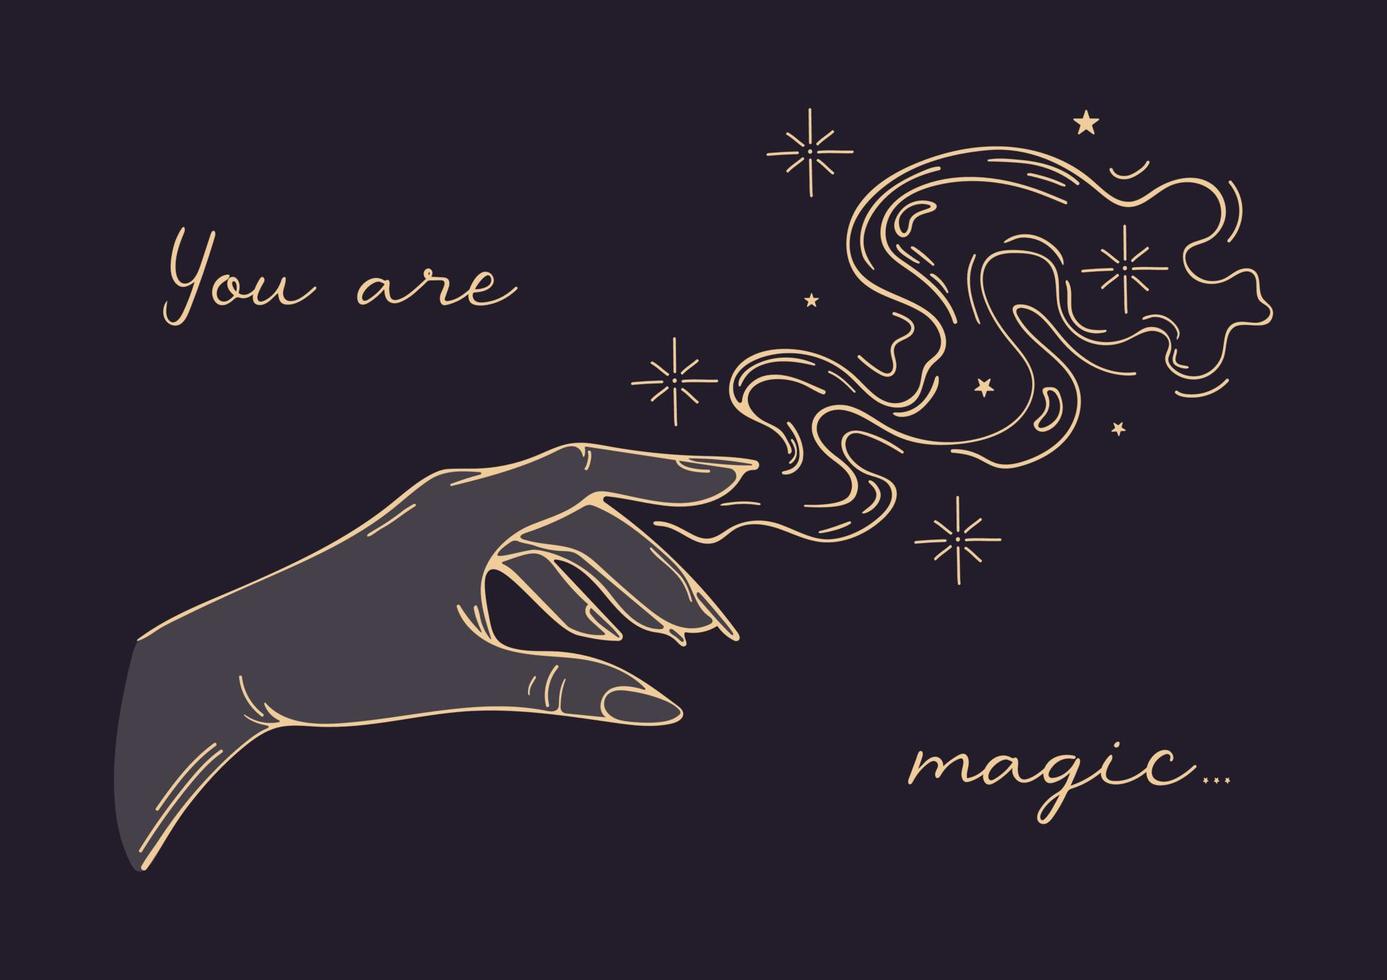 Vector illustration in vintage style. Womens golden hands. Lettering you are magic. Halloween, magic, witchcraft, astrology, mystic. For posters, postcards, banners, printing on fabric, tattoo design.